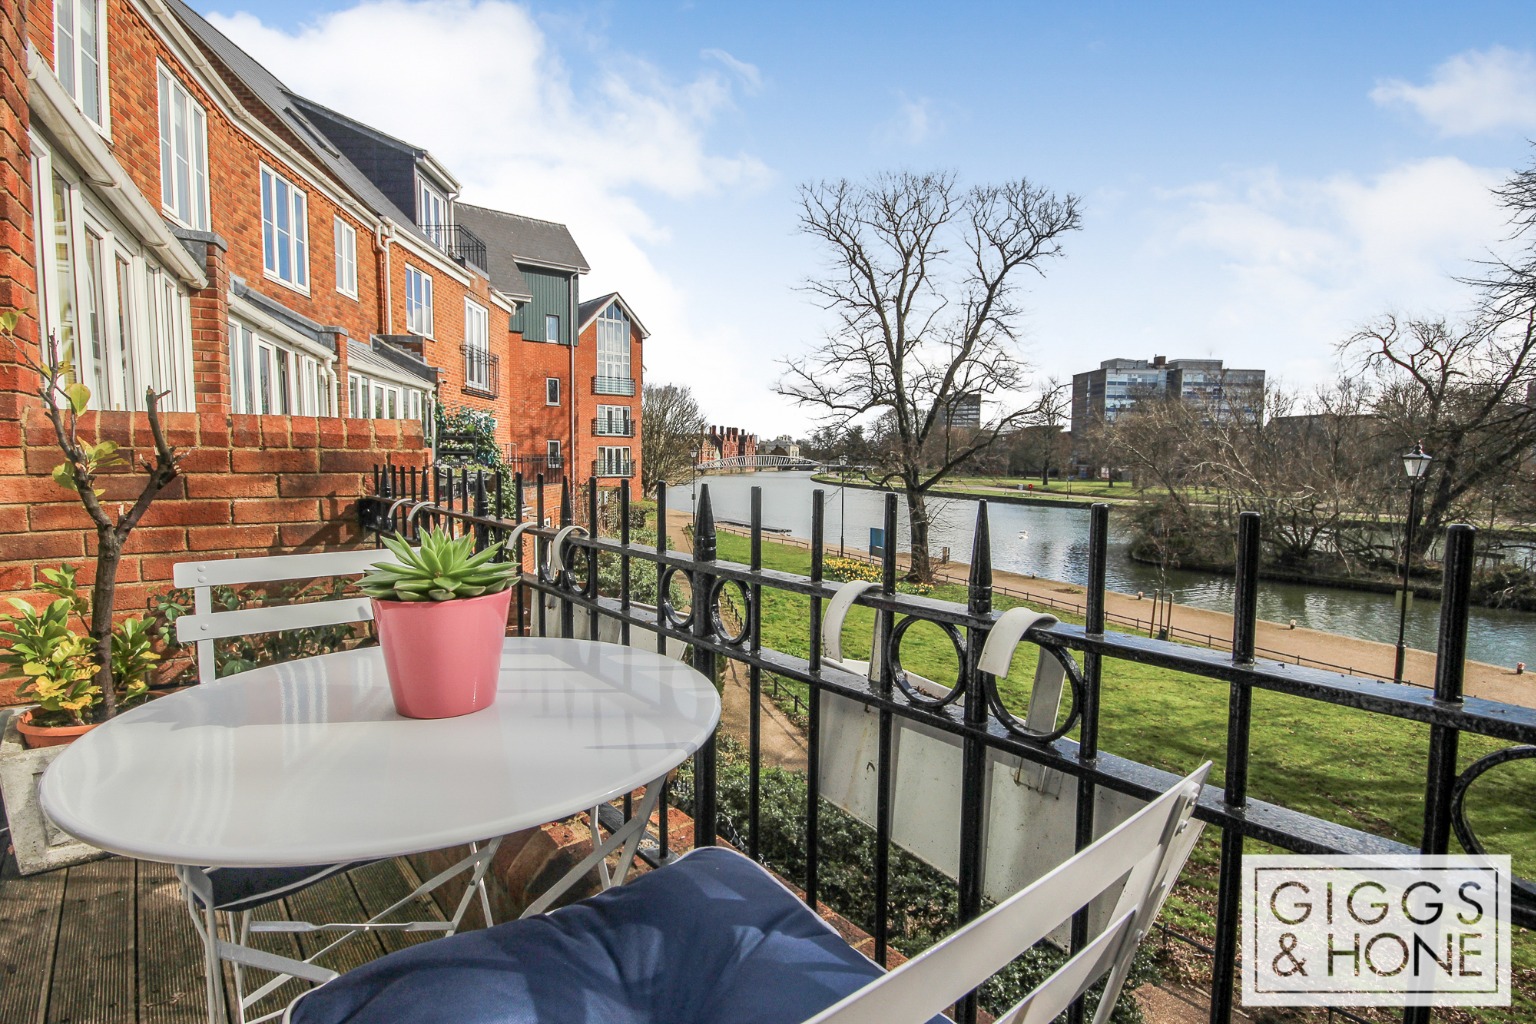 With stunning river views this three bedroom maisonette is  offered for sale in immaculate condition with river views. This immaculate apartment is a stone’s throw away from Bedford train station and the Riverside North Development providing a of restaurants and  leisure facilities.